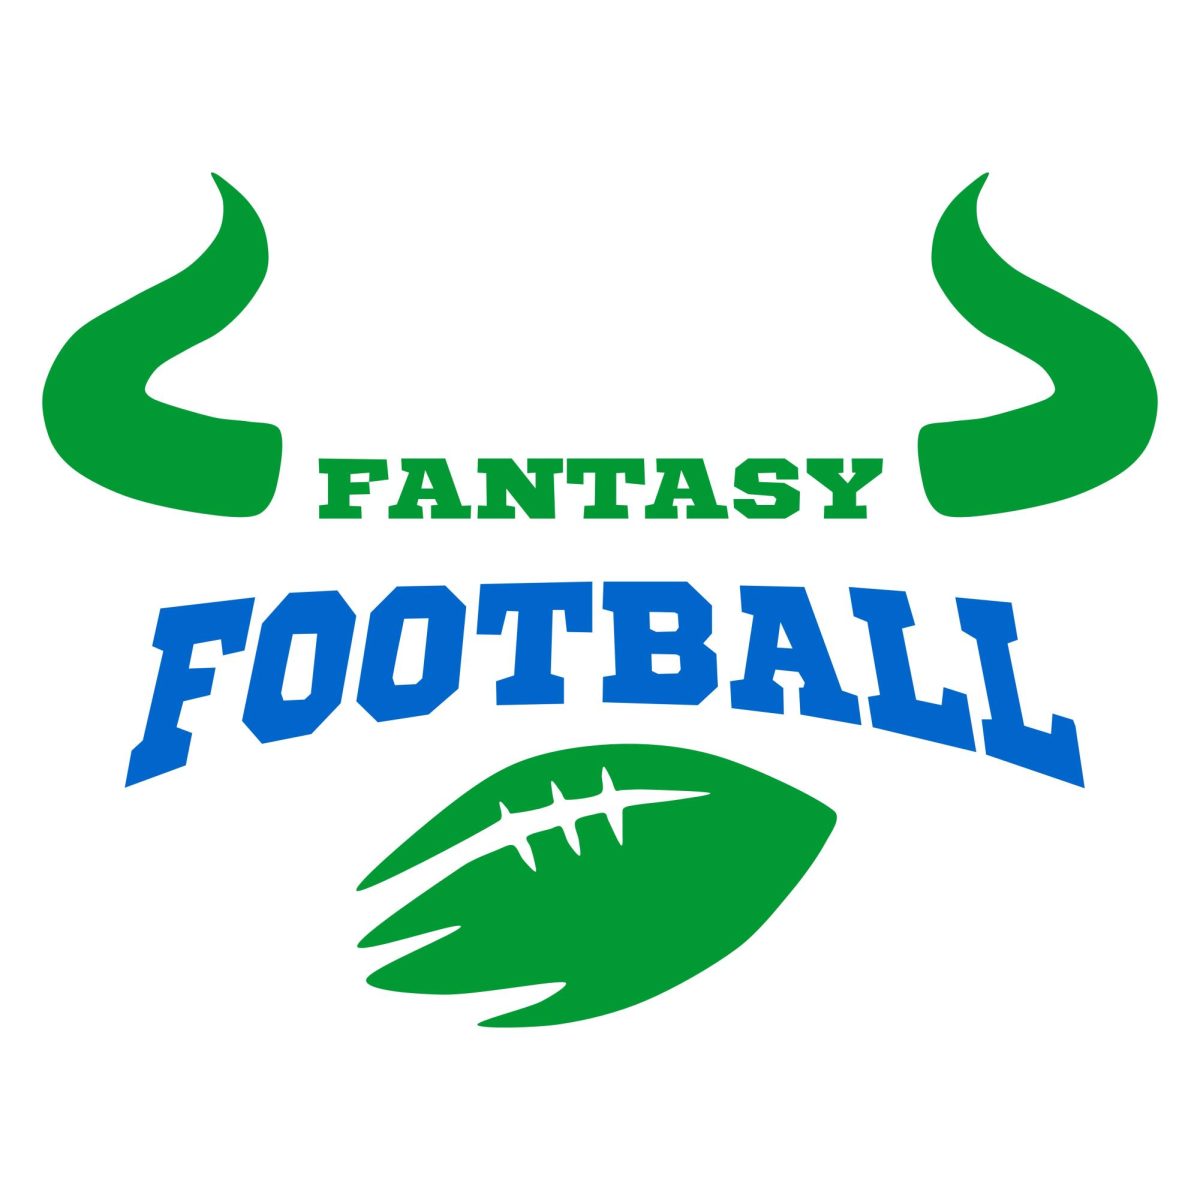 These 4 players will help win your fantasy football league in 2023